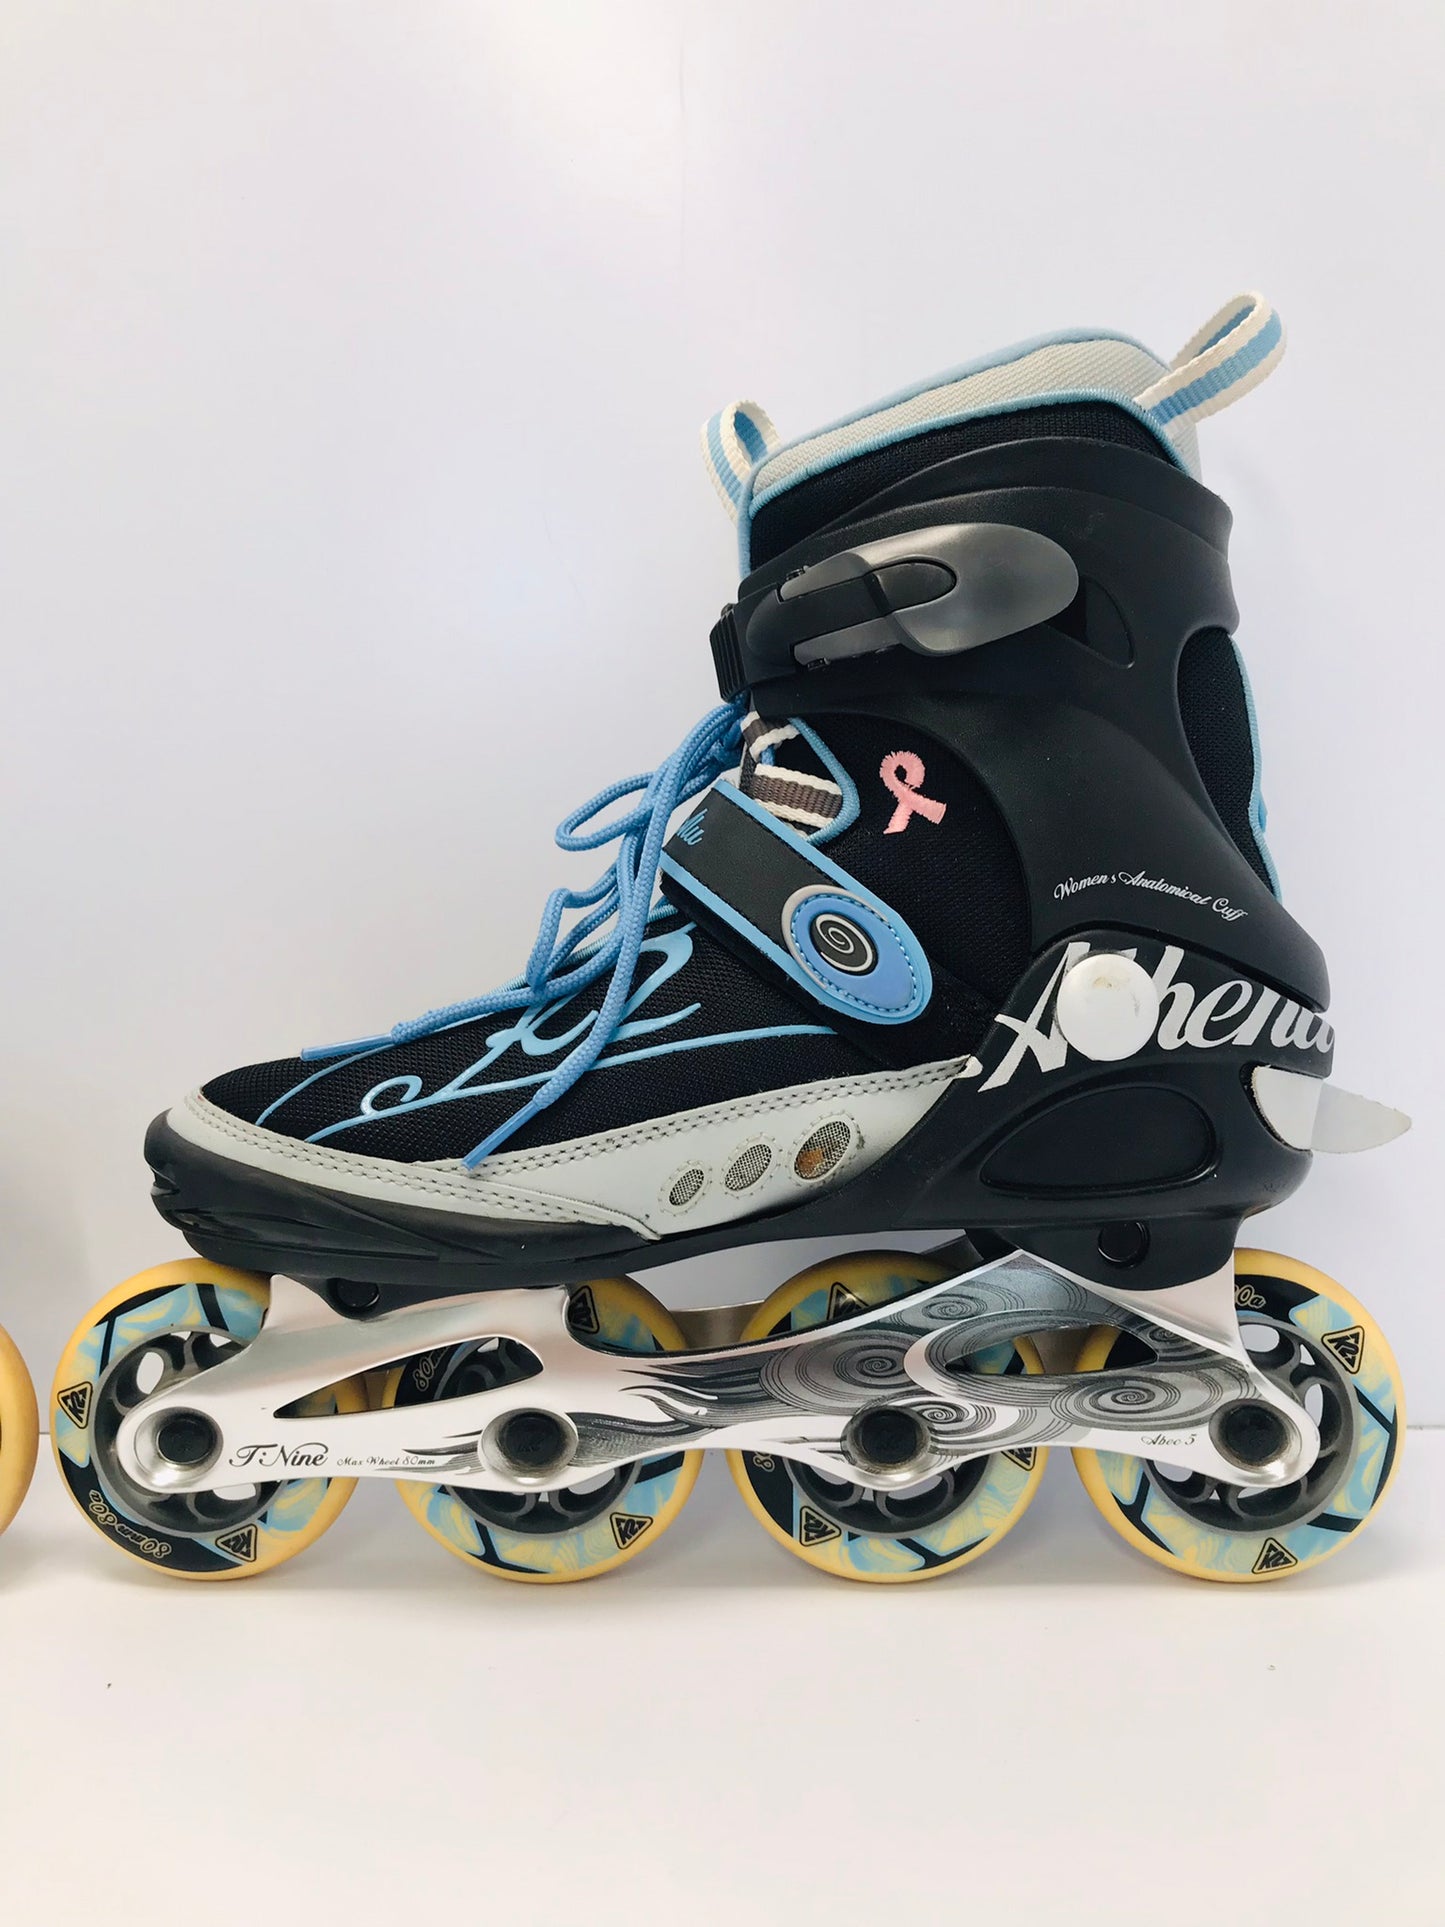 Inline Roller Skates Ladies Size 8 K-2 Black and Grey Like New Outstanding Quality